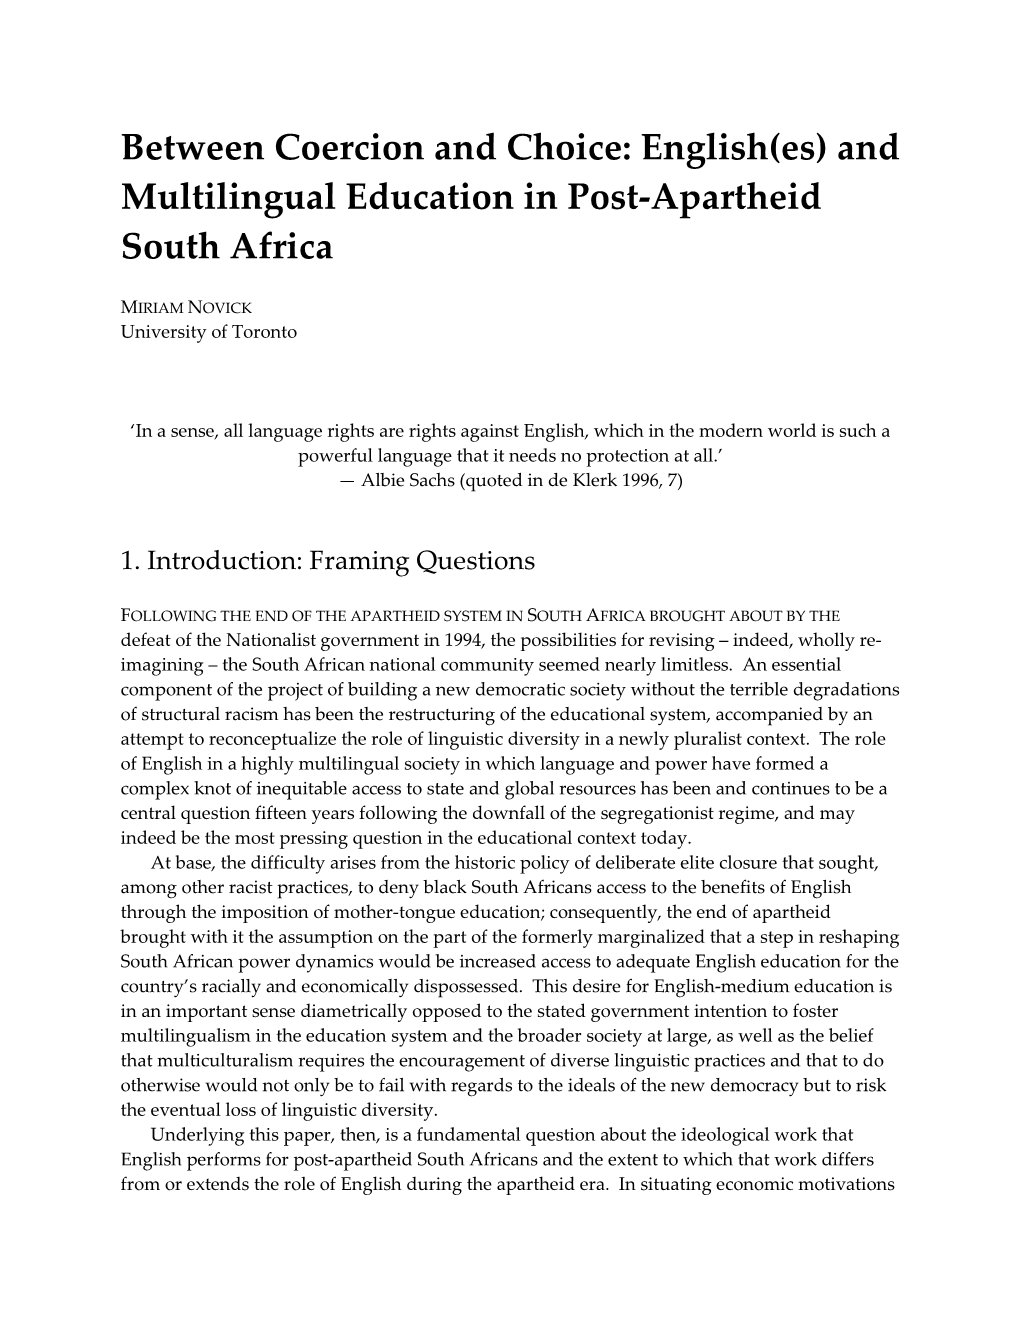 Between Coercion and Choice: English(Es) and Multilingual Education in Post-Apartheid South Africa